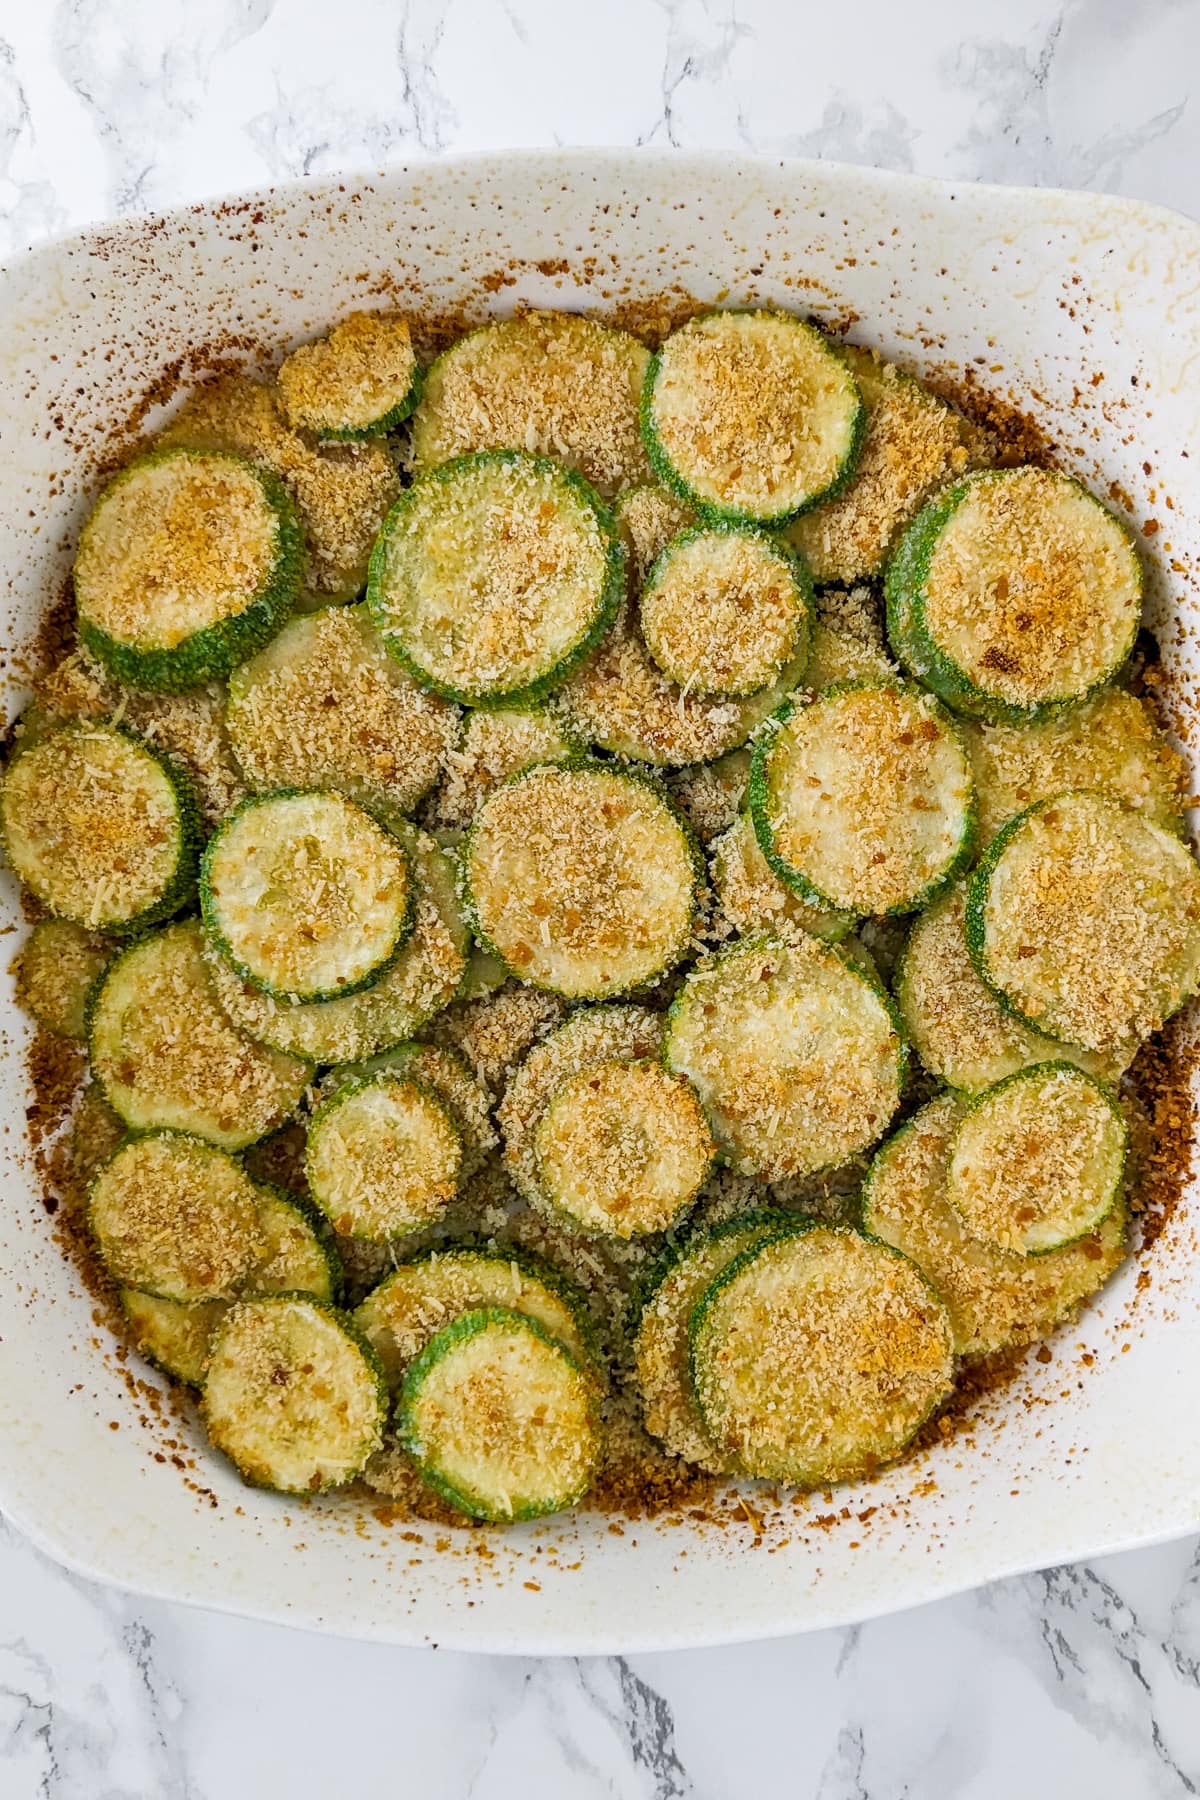 Top view of fried zucchini slices in a casserole.